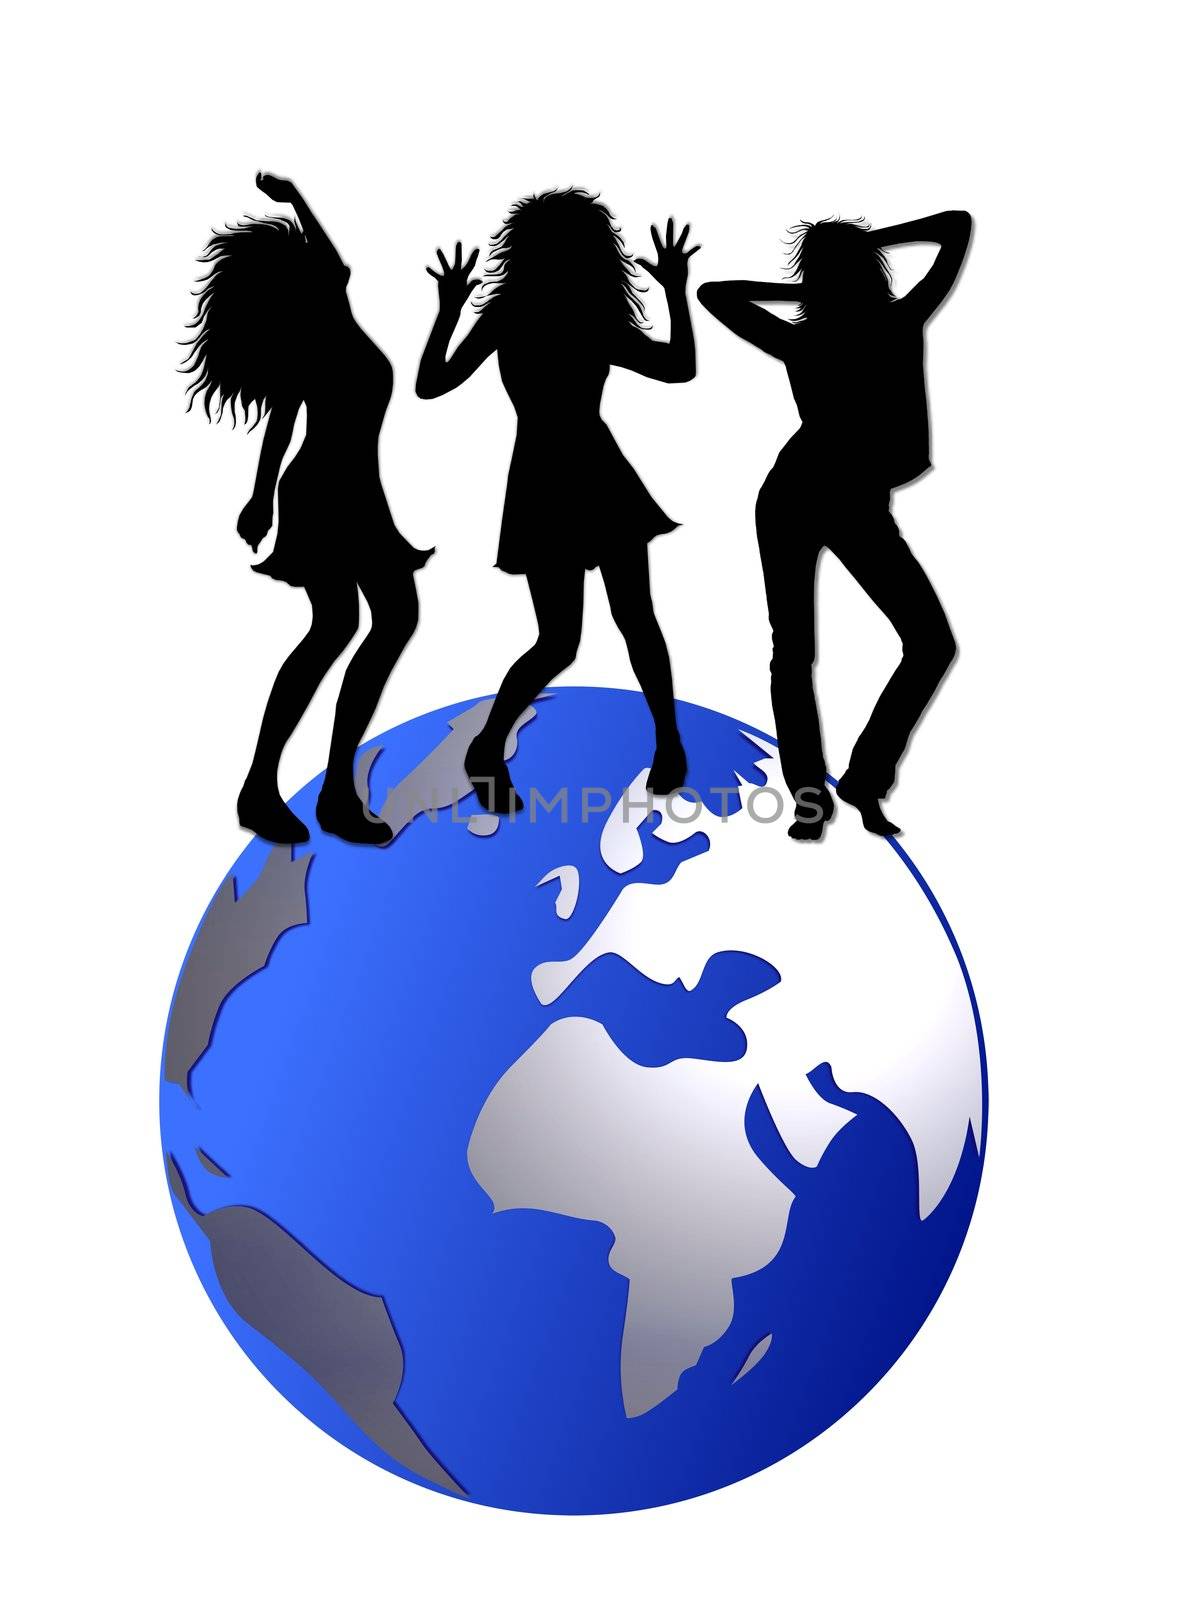 3 girl silhouettes dancing on the world globe by peromarketing